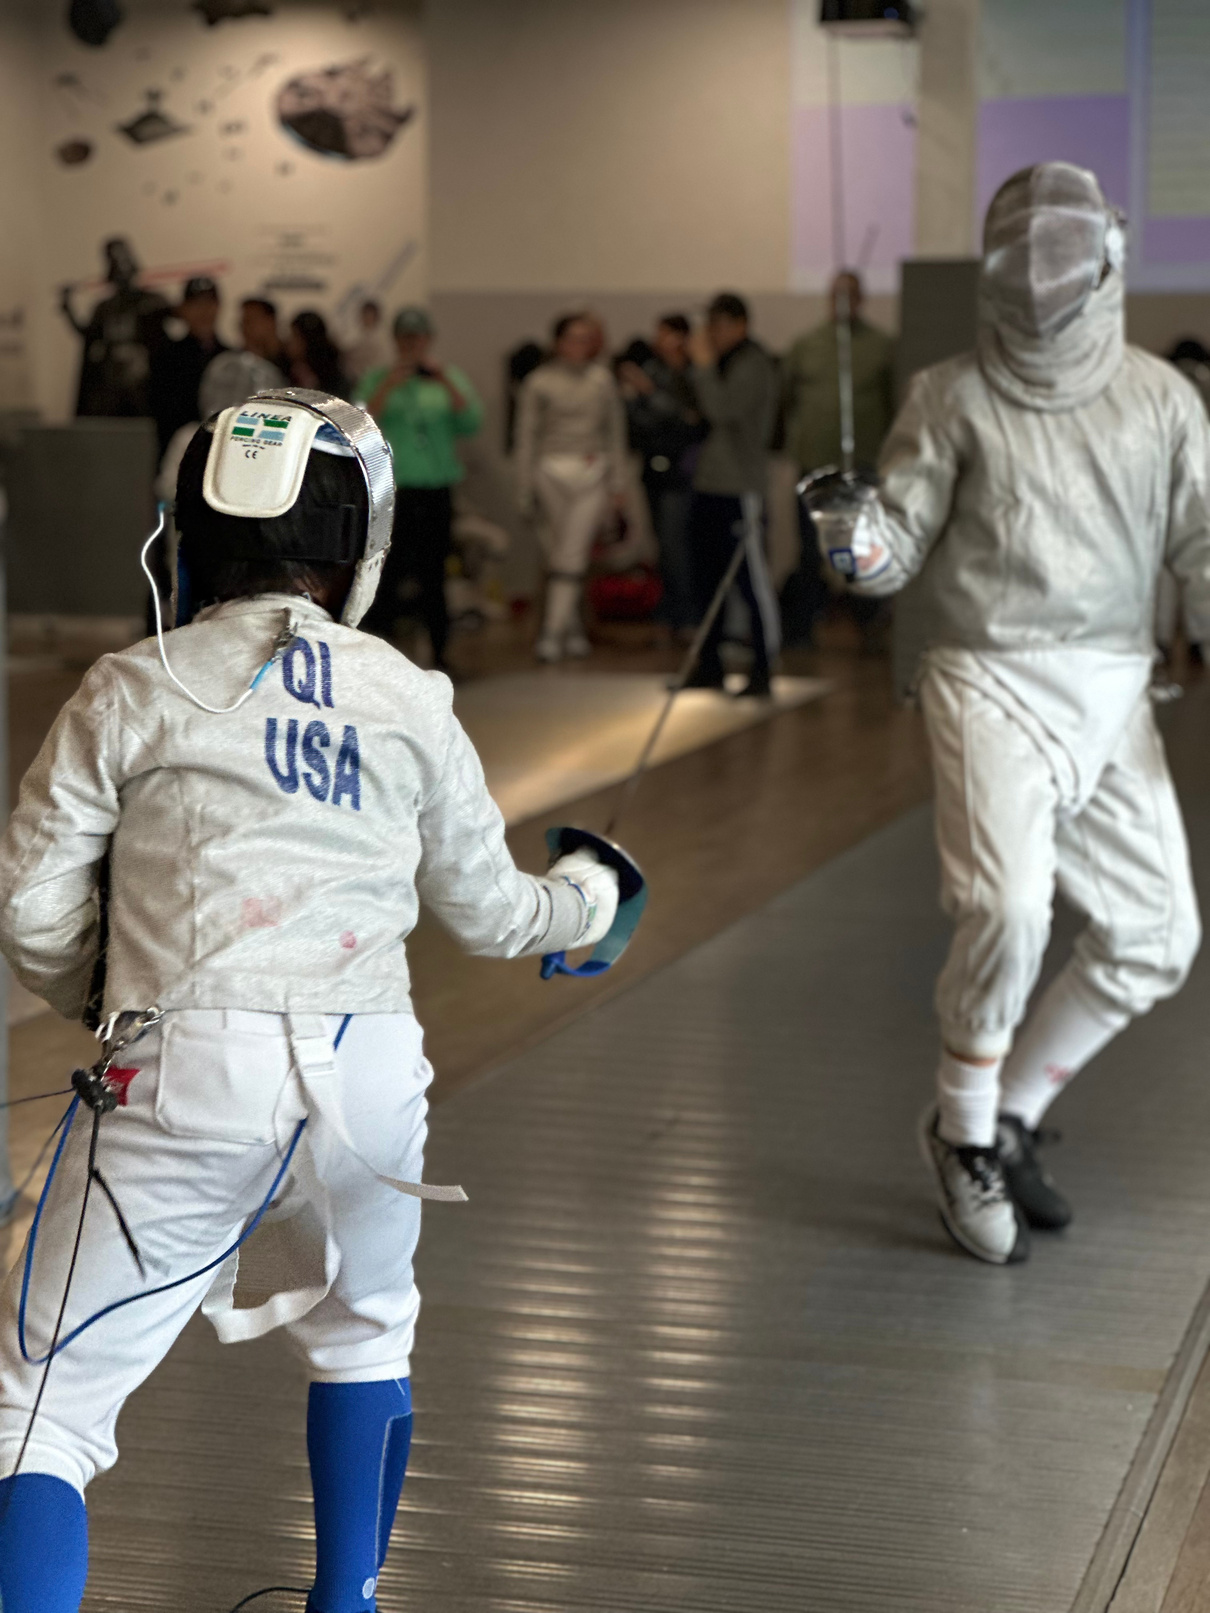 Two Boy saber fencers in fencing gear at a local tournament in Southern California on a metal fencing strip